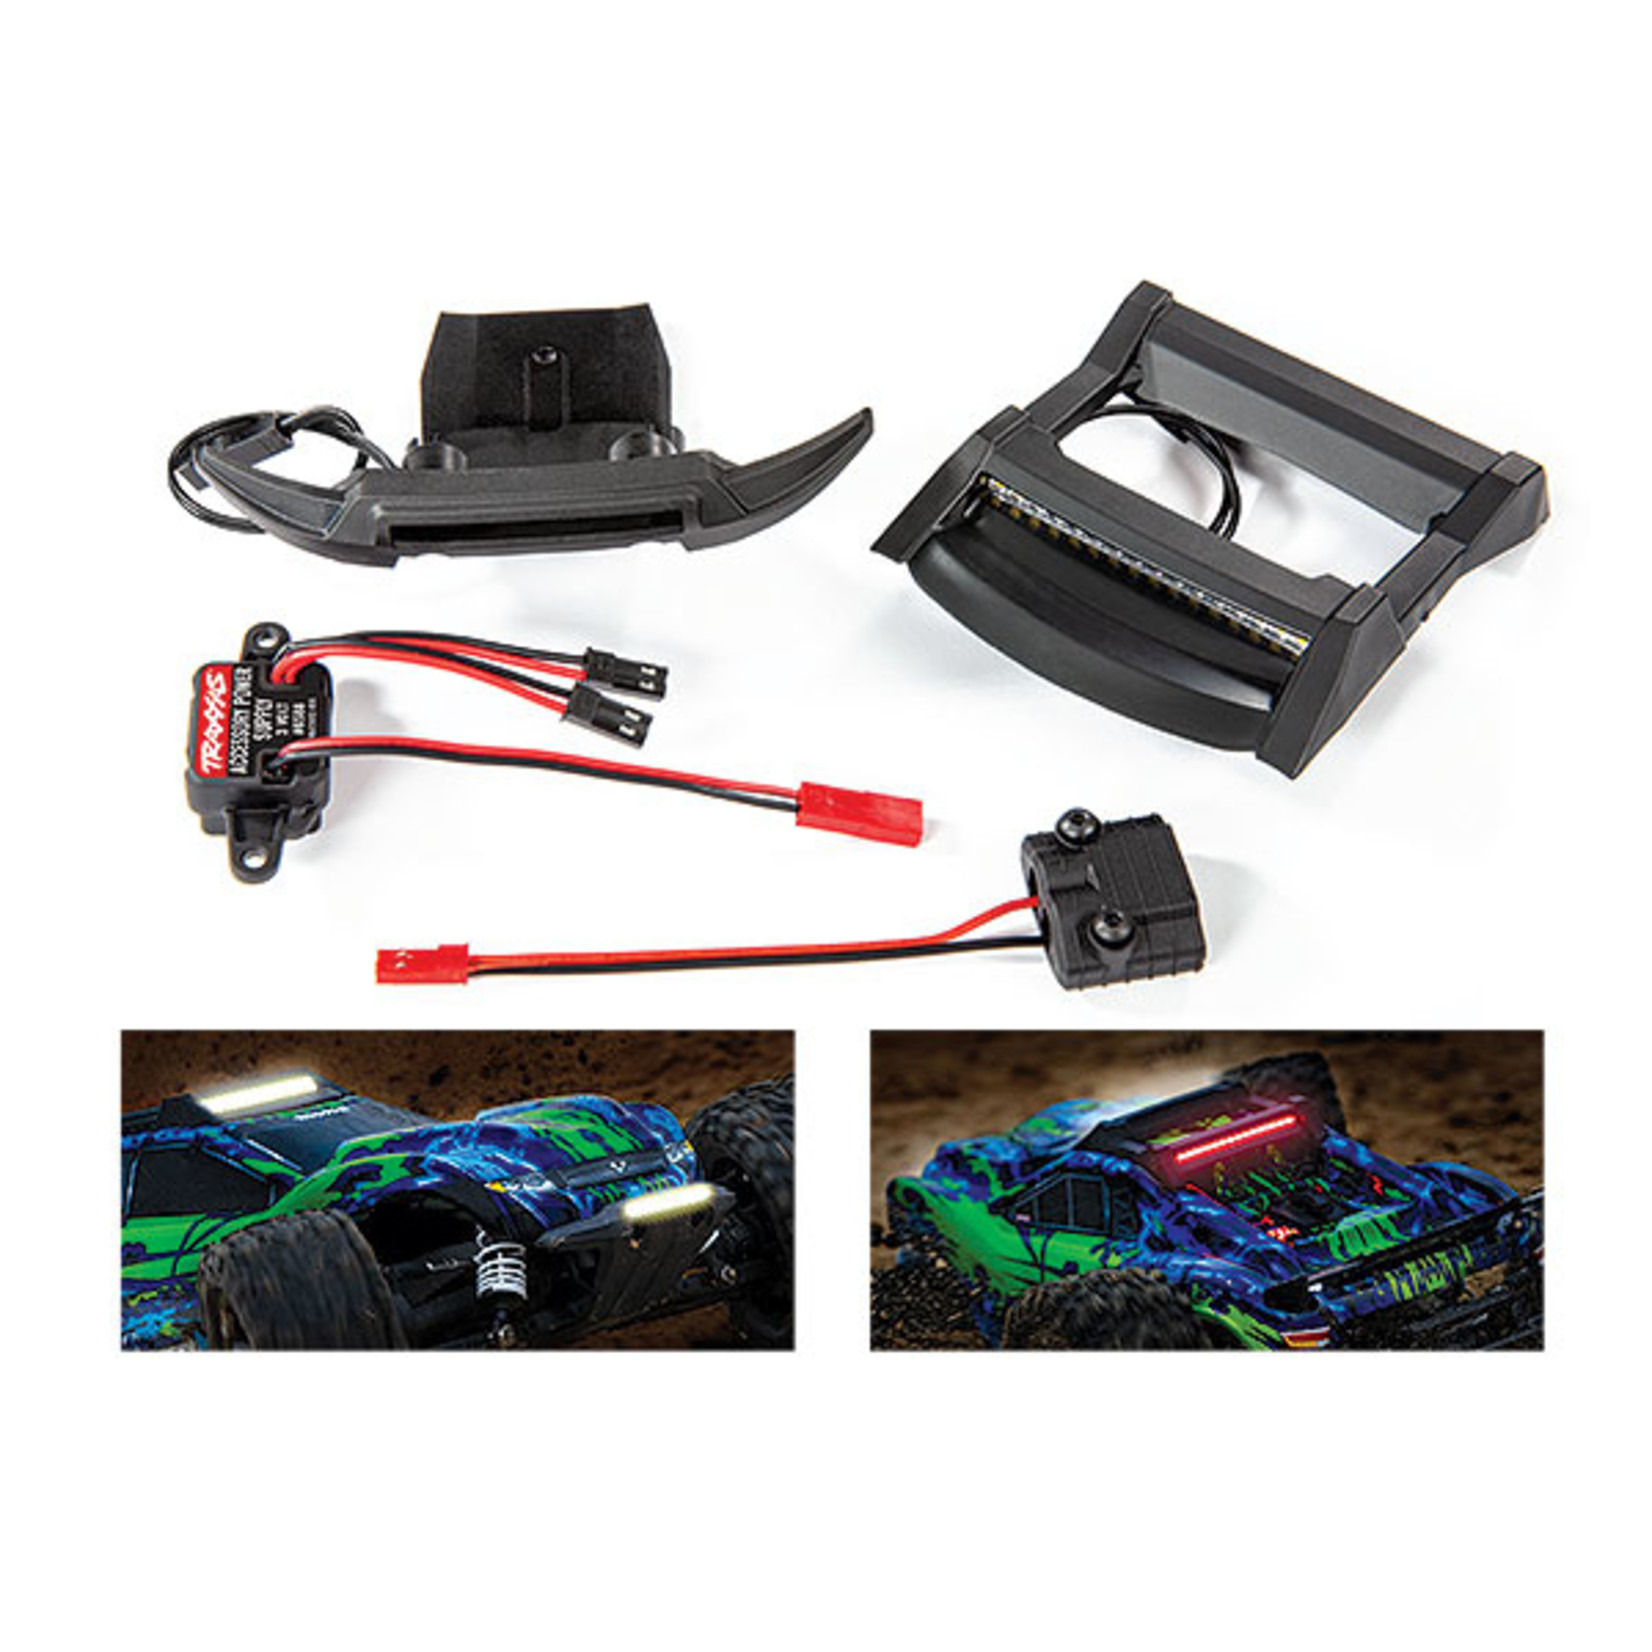 Traxxas 6795 - LED light set, complete (includes bumper wi